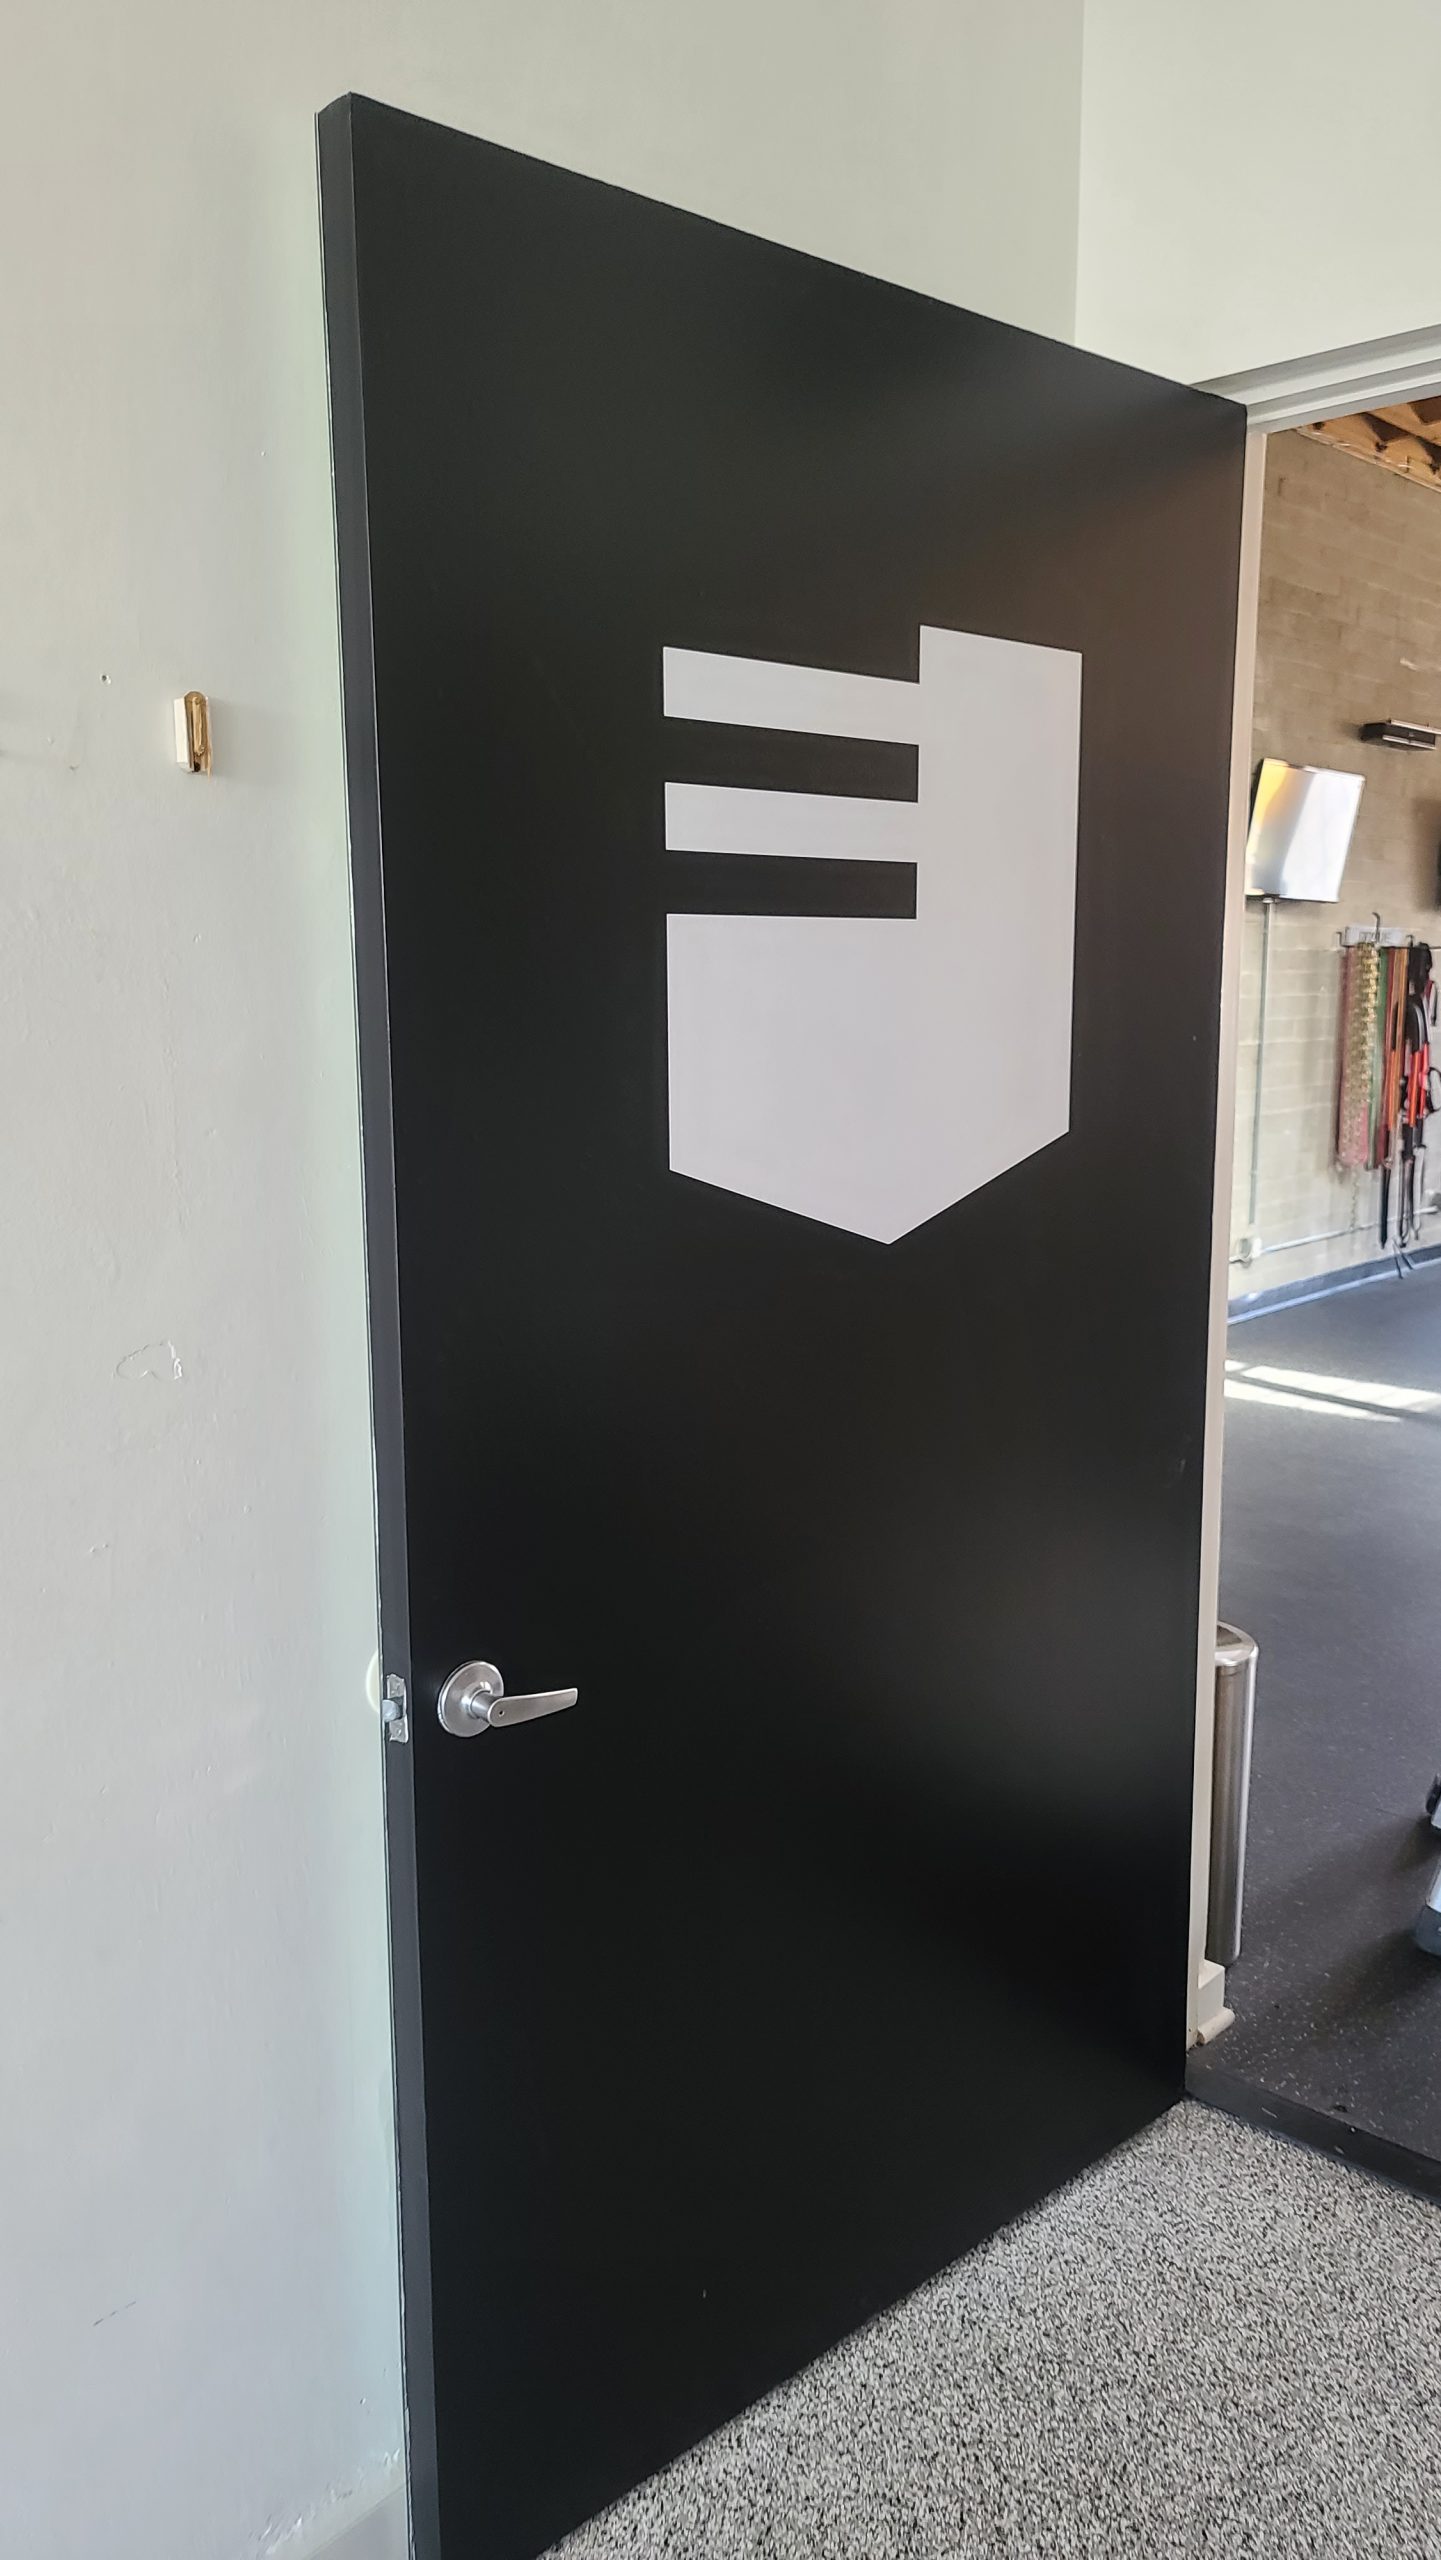 Door graphics for Esser's gym, giving them a memorable entrance sign, so their brand will be prominent for customers going in their Culver City branch.